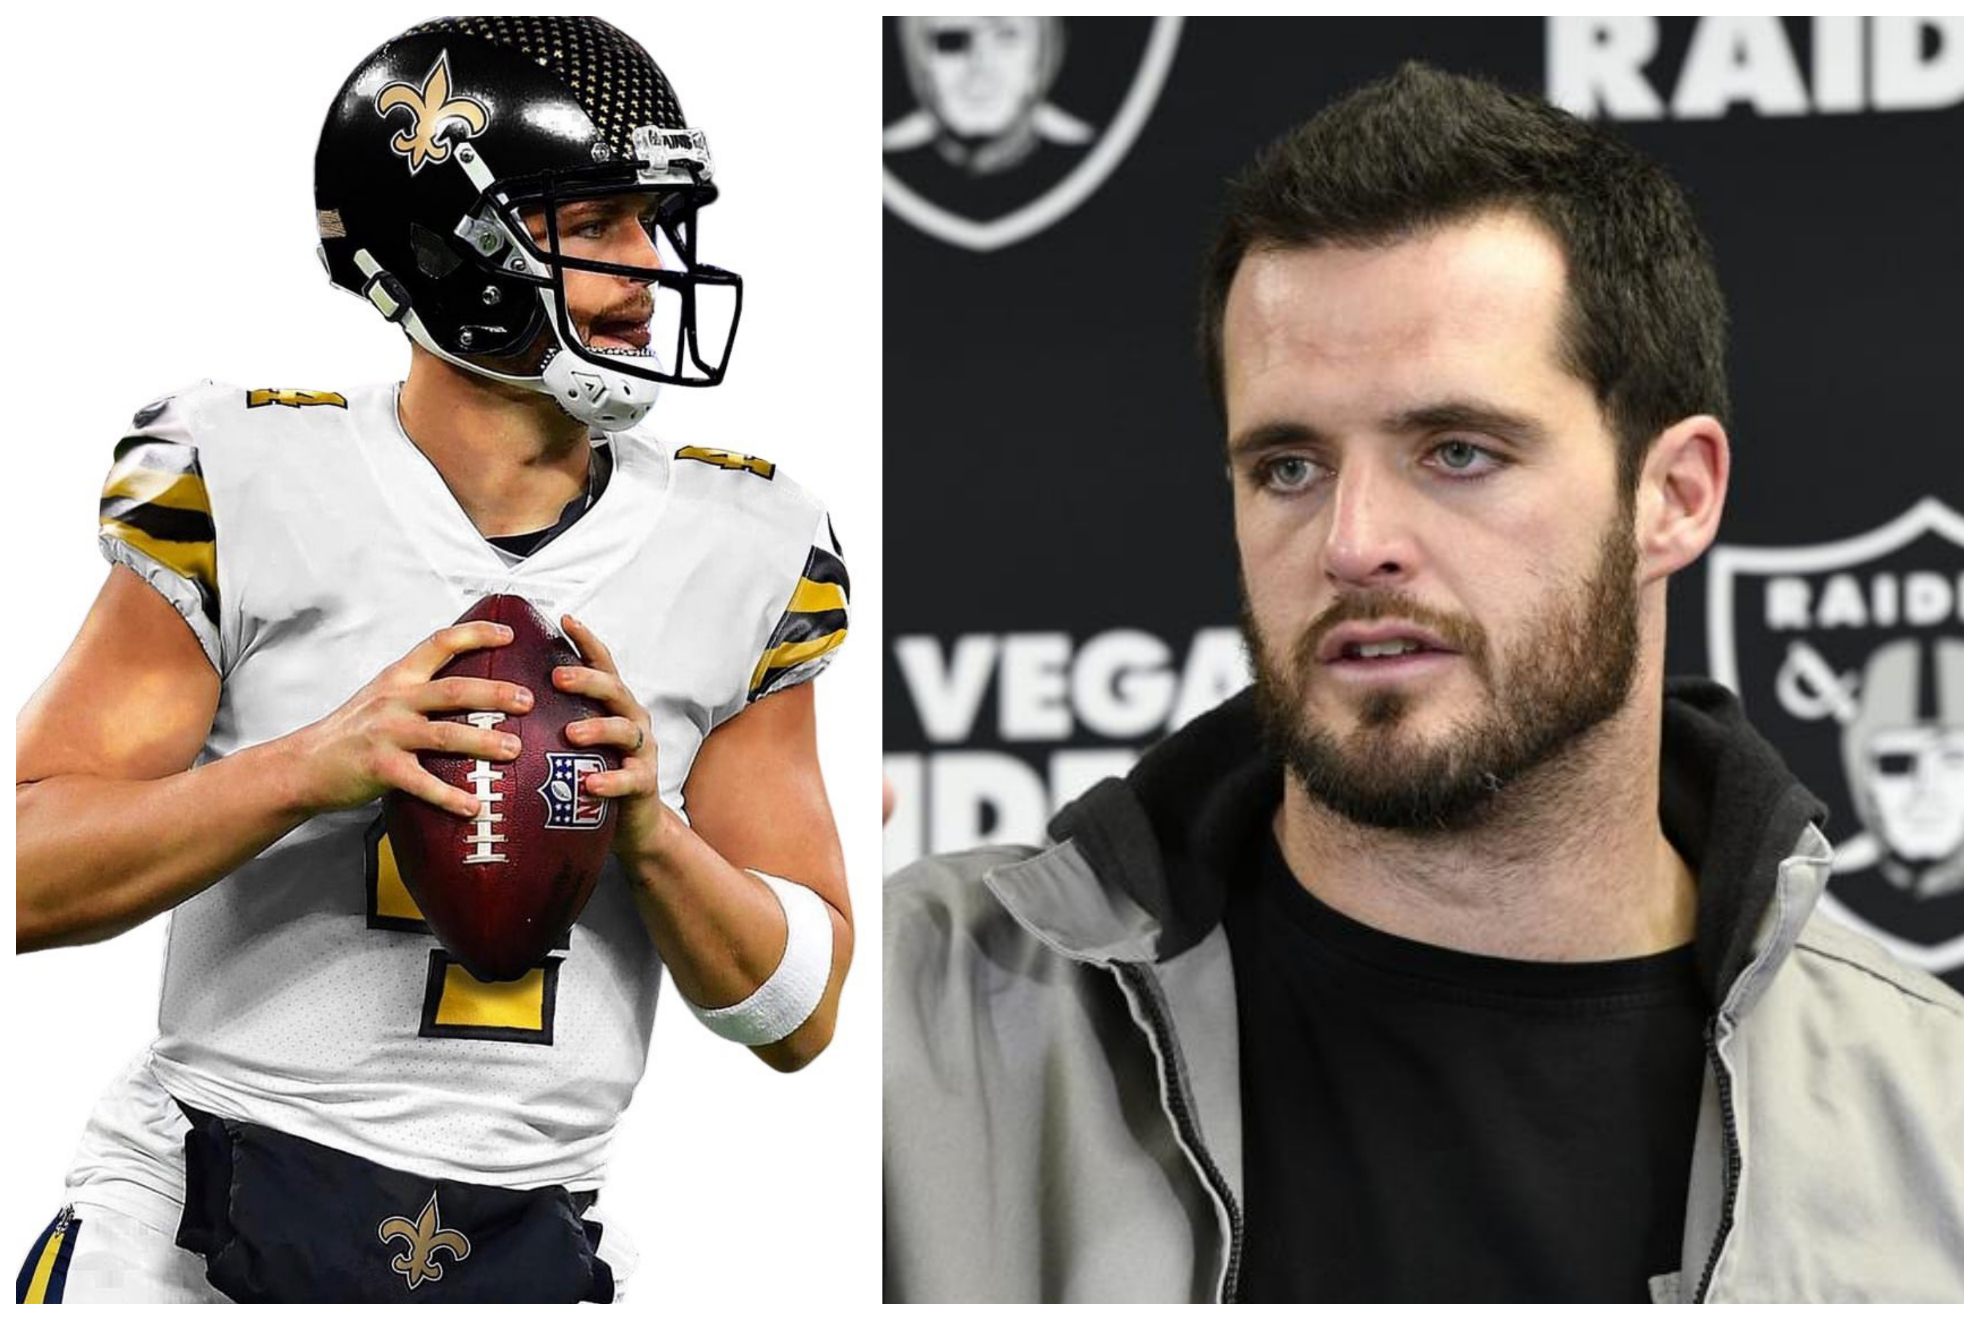 Derek Carr is wanted by the Saints as their next starting quarterback and want to sign him before any other franchise offers him another deal.